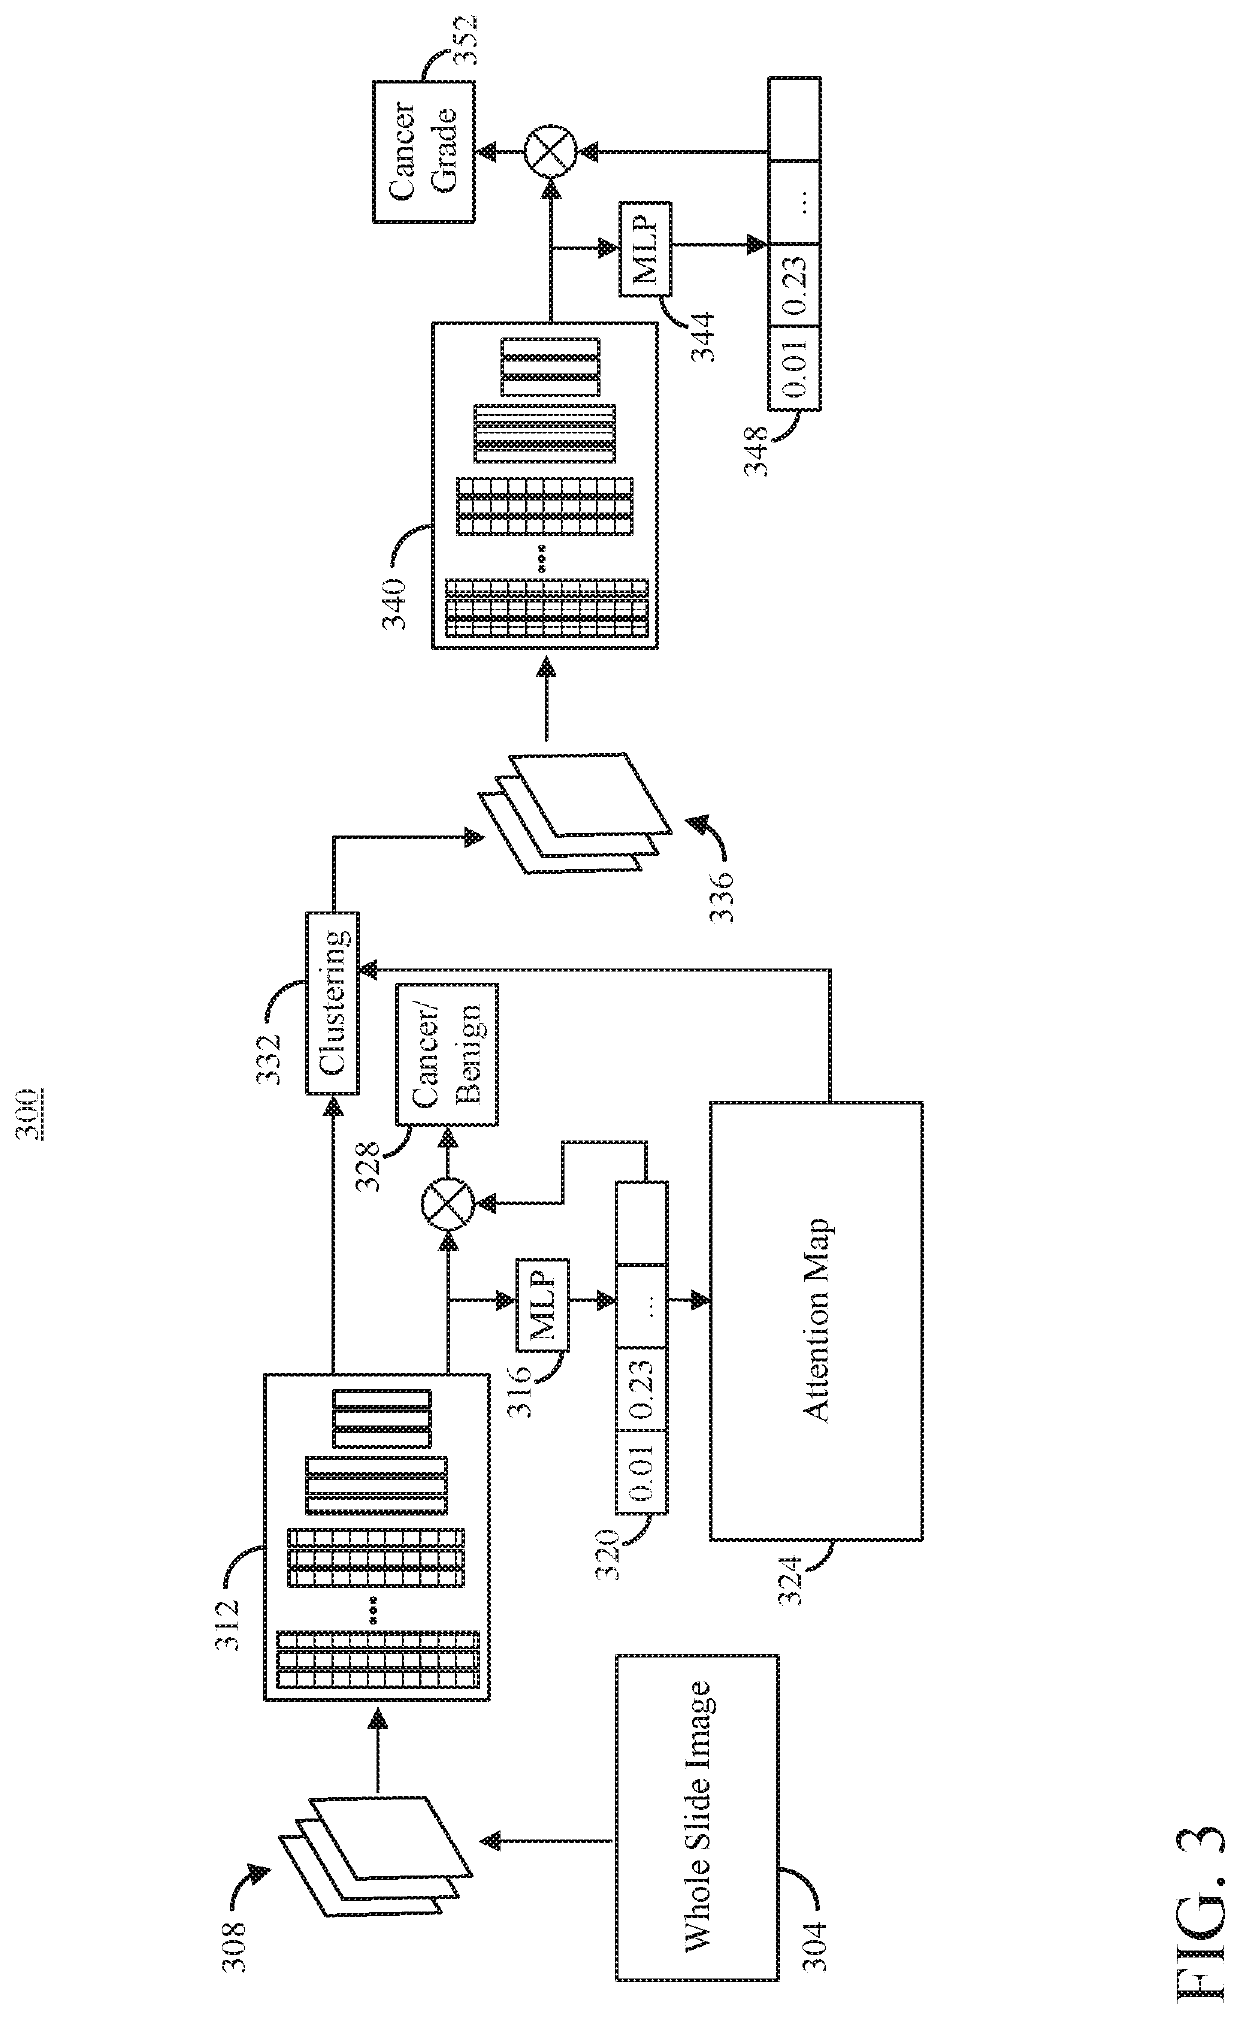 Systems and Methods for Automated Image Analysis